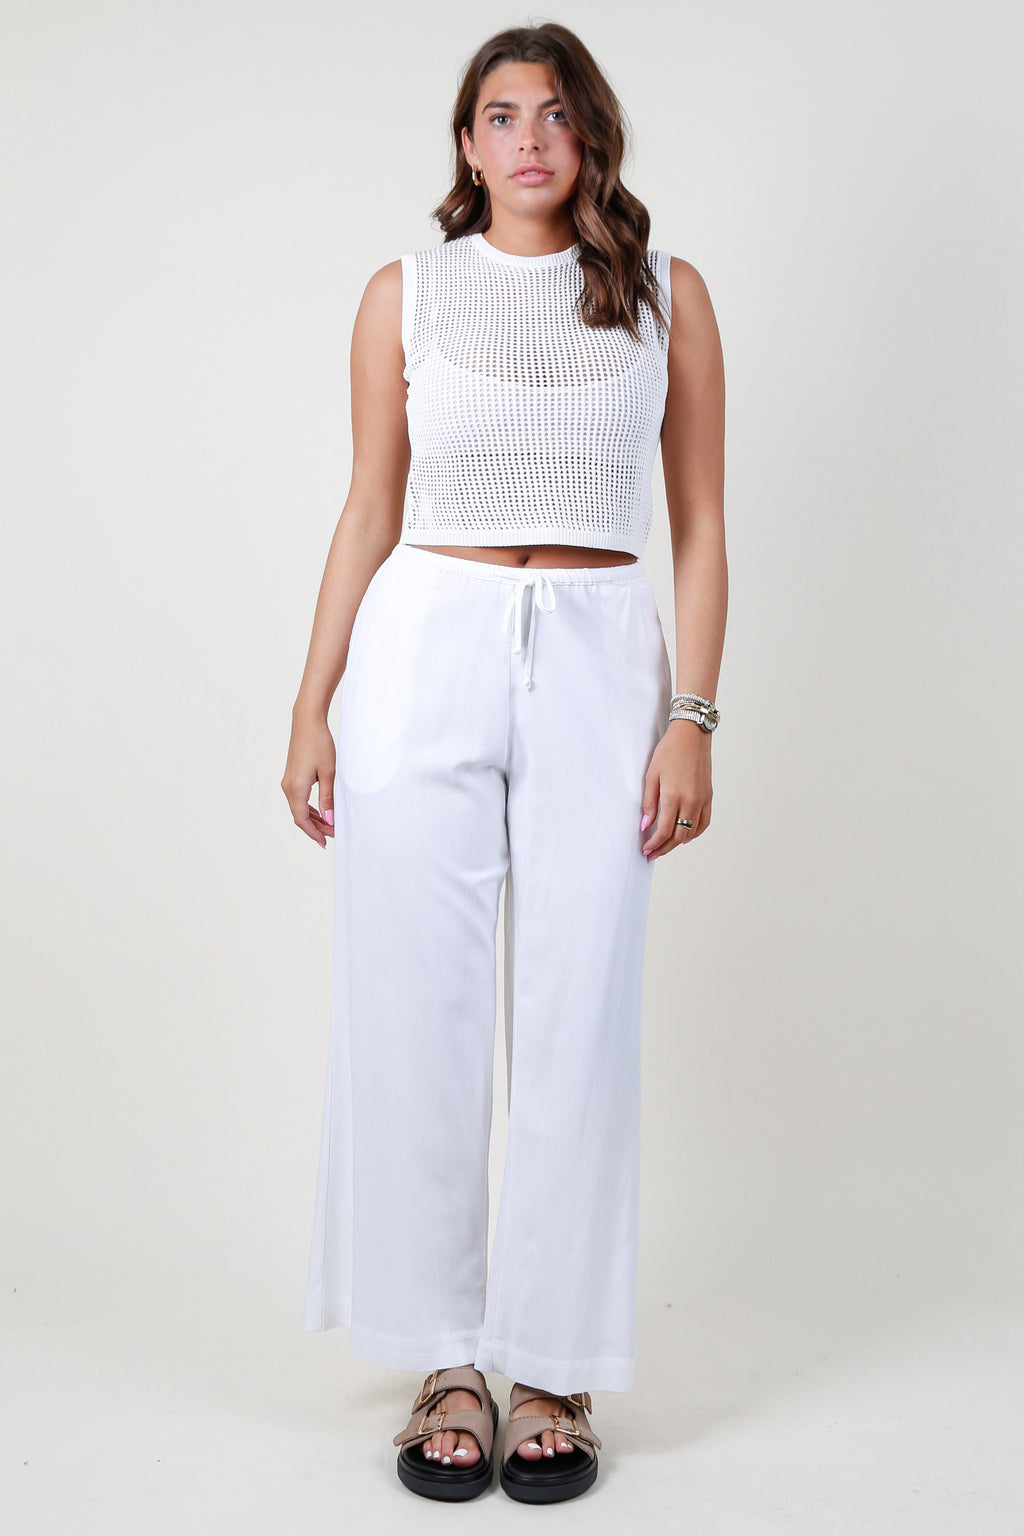 The Miley Top - White